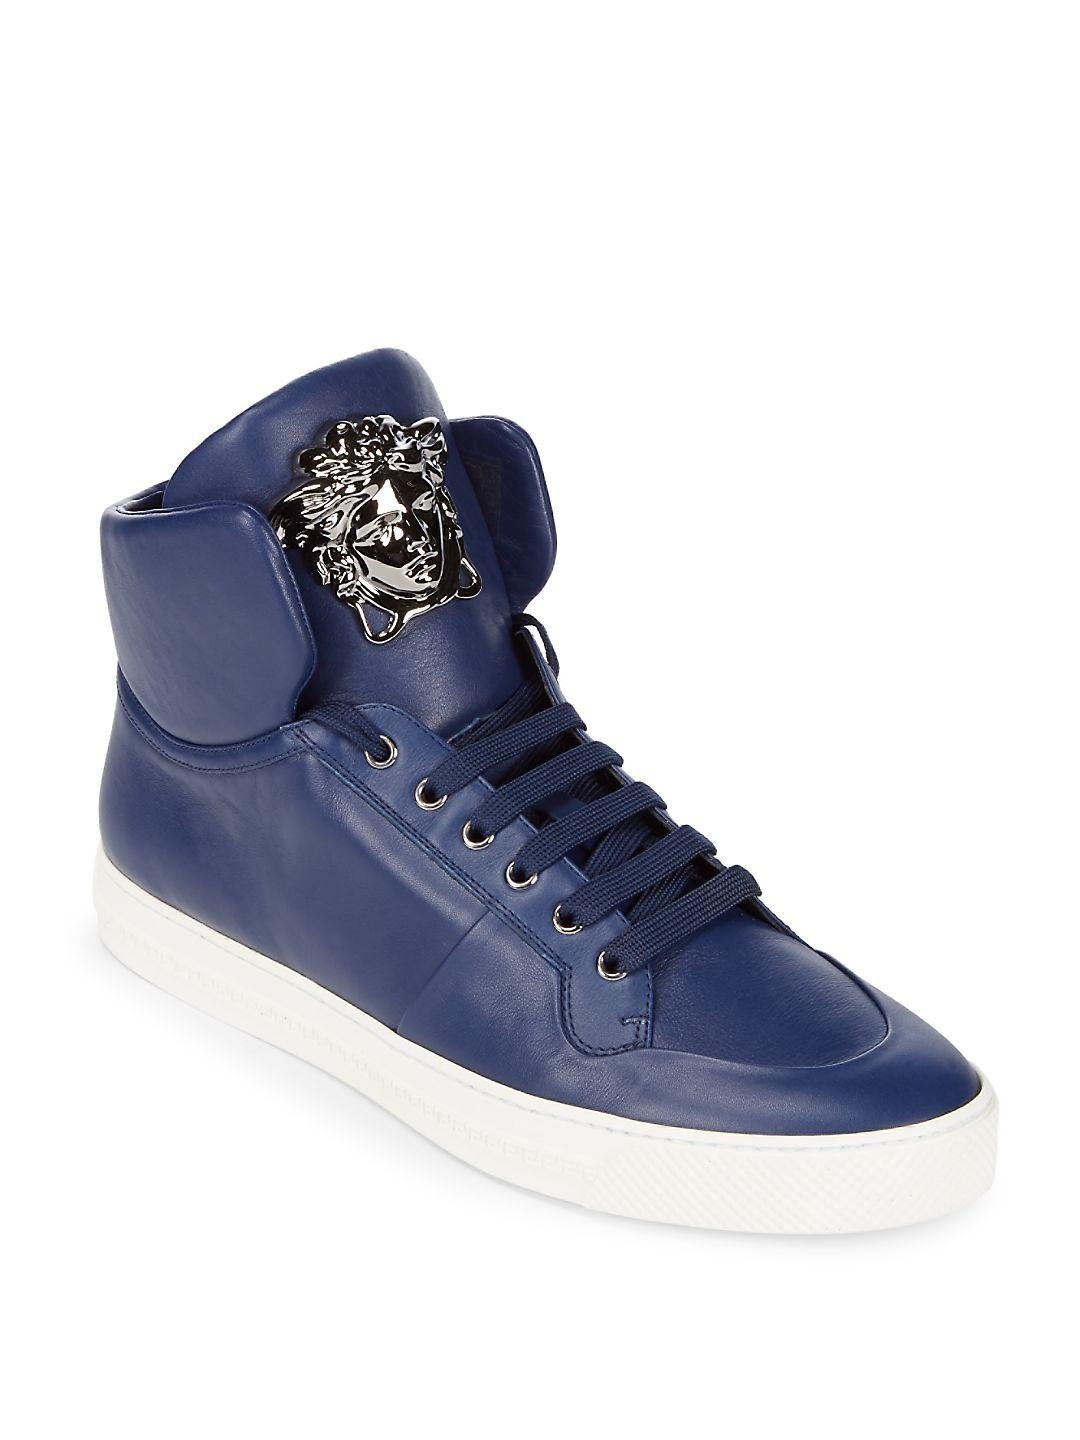 Versace Leather-high Top Sneakers in Blue for Men - Lyst